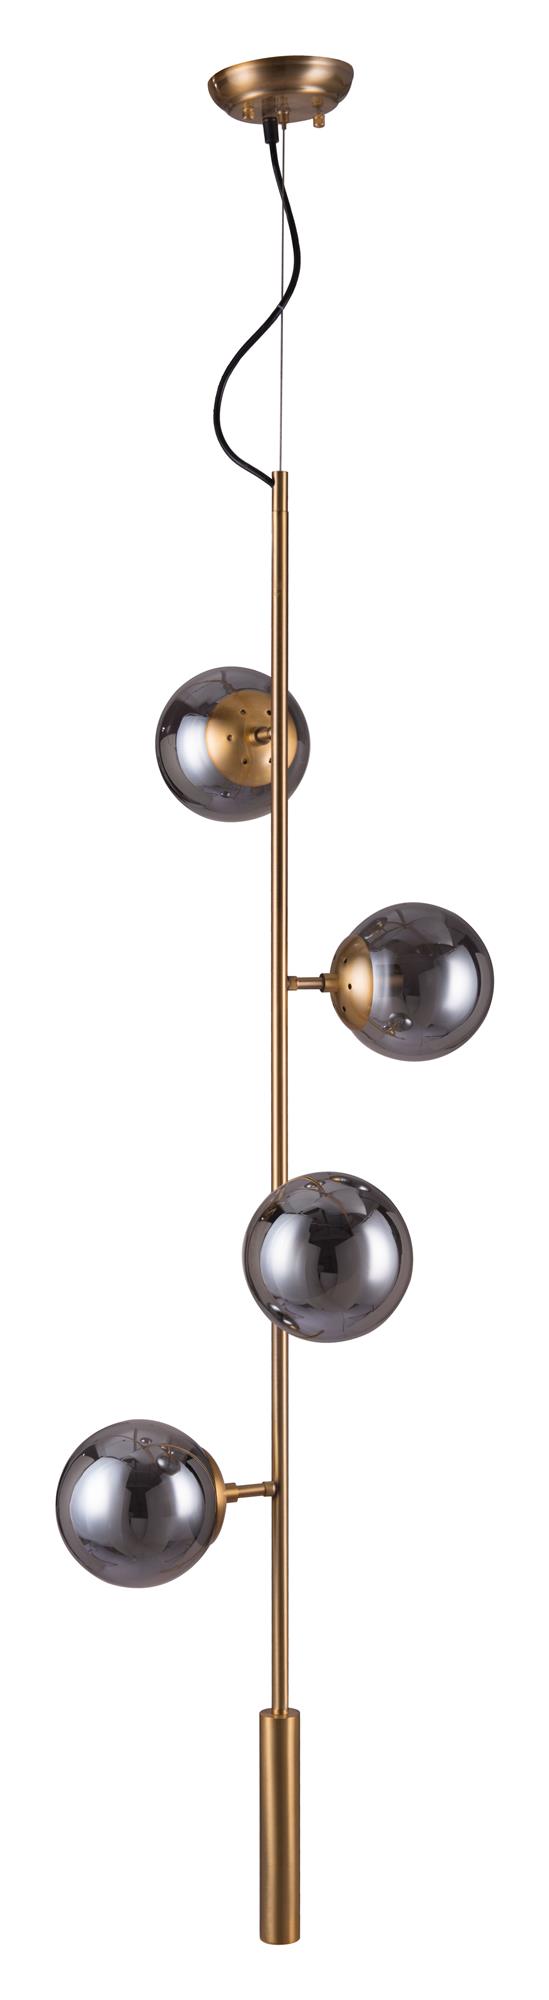 Zola Ceiling Lamp with Adjustable Cord Length  -  N/A